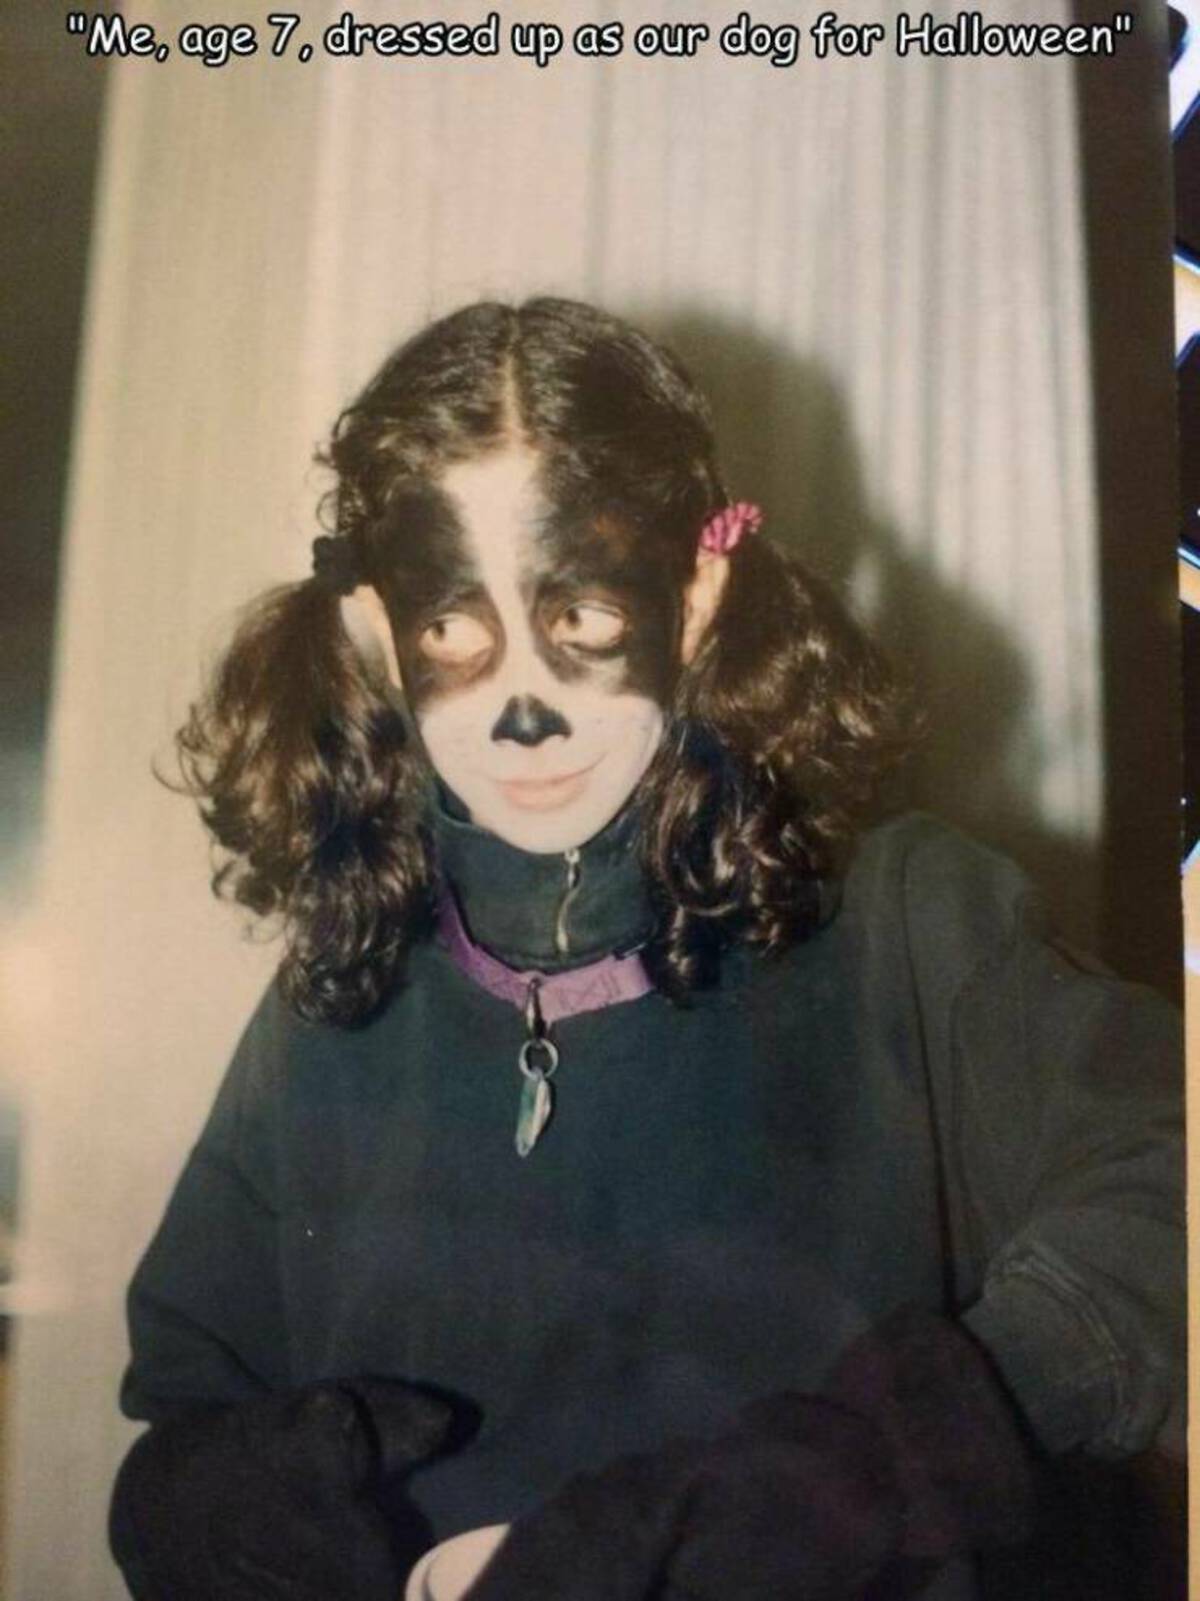 Dog - "Me, age 7, dressed up as our dog for Halloween"